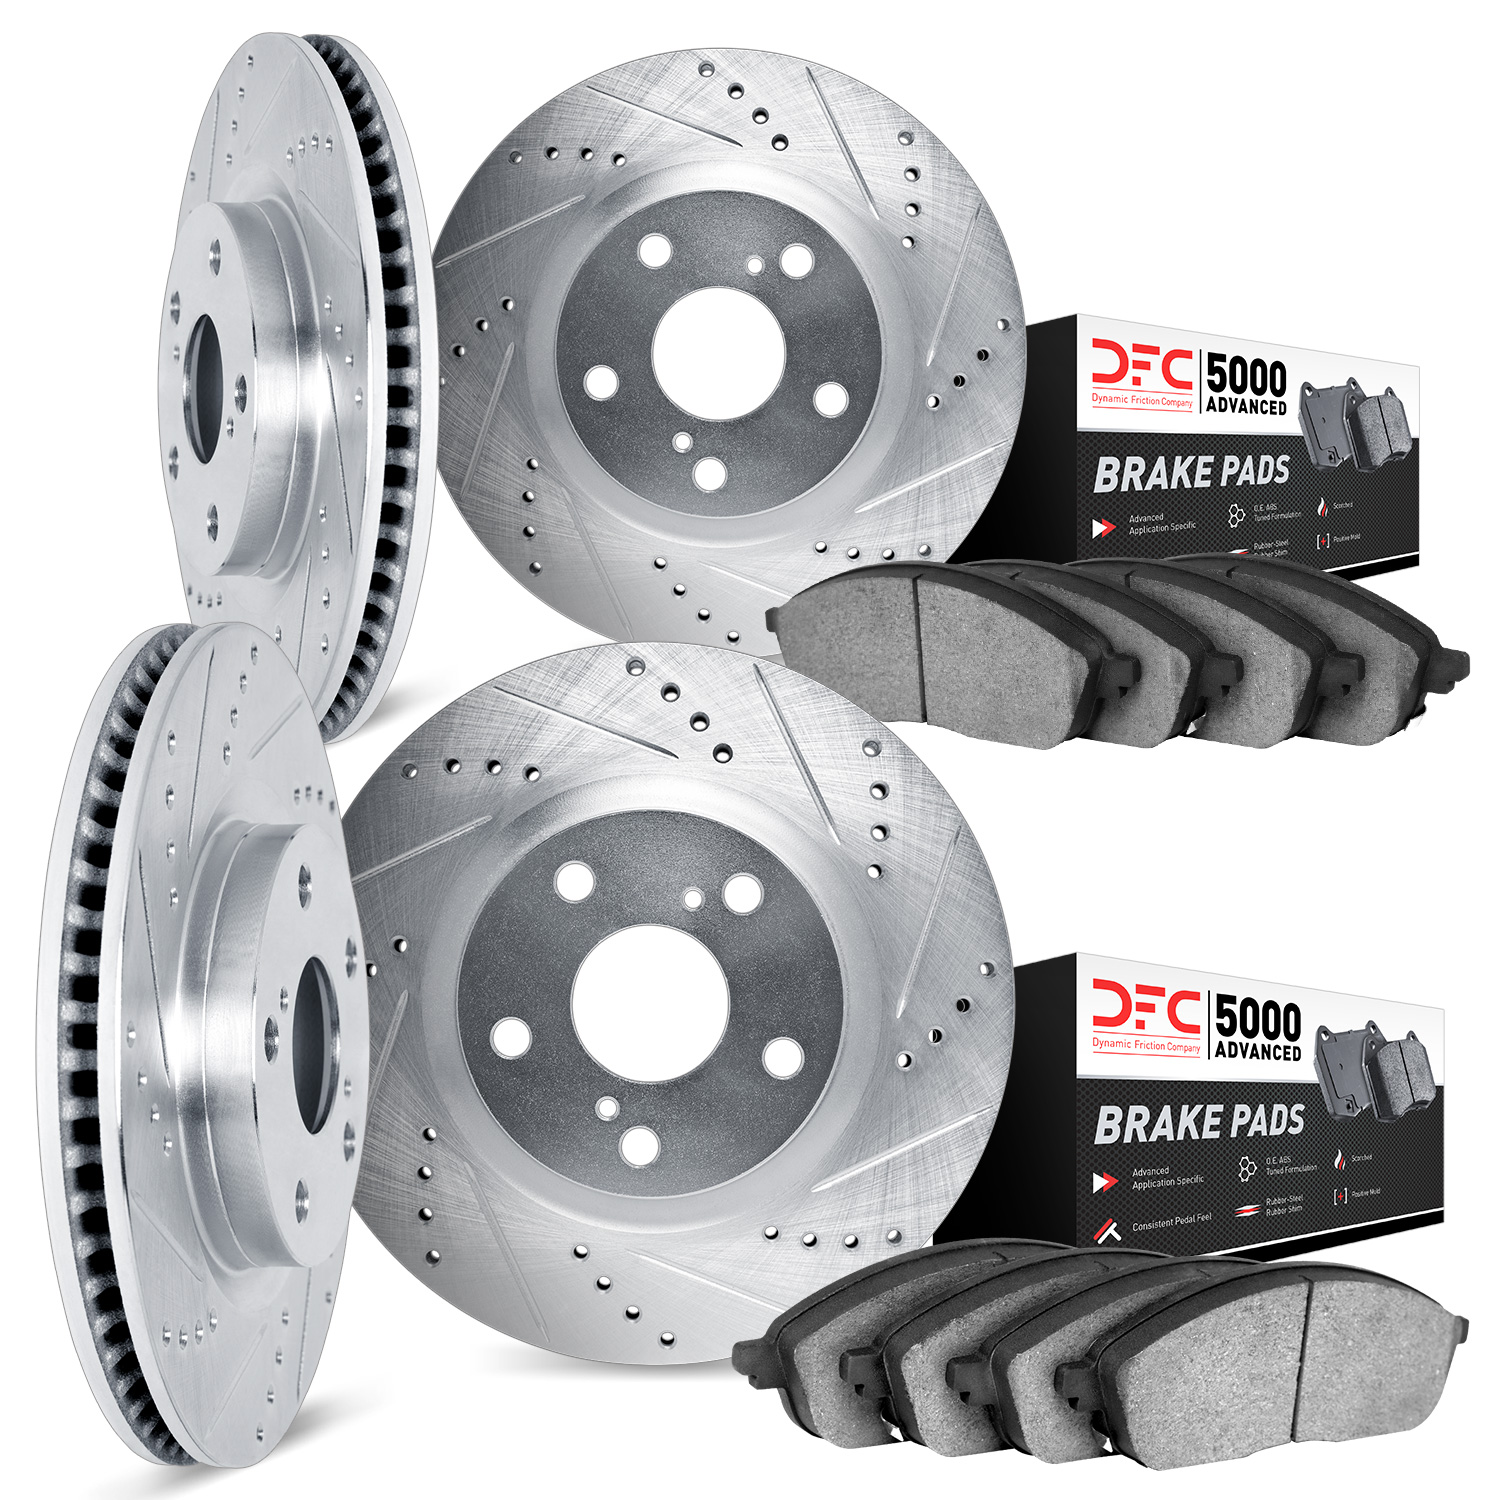 7504-46016 Drilled/Slotted Brake Rotors w/5000 Advanced Brake Pads Kit [Silver], 2005-2008 GM, Position: Front and Rear